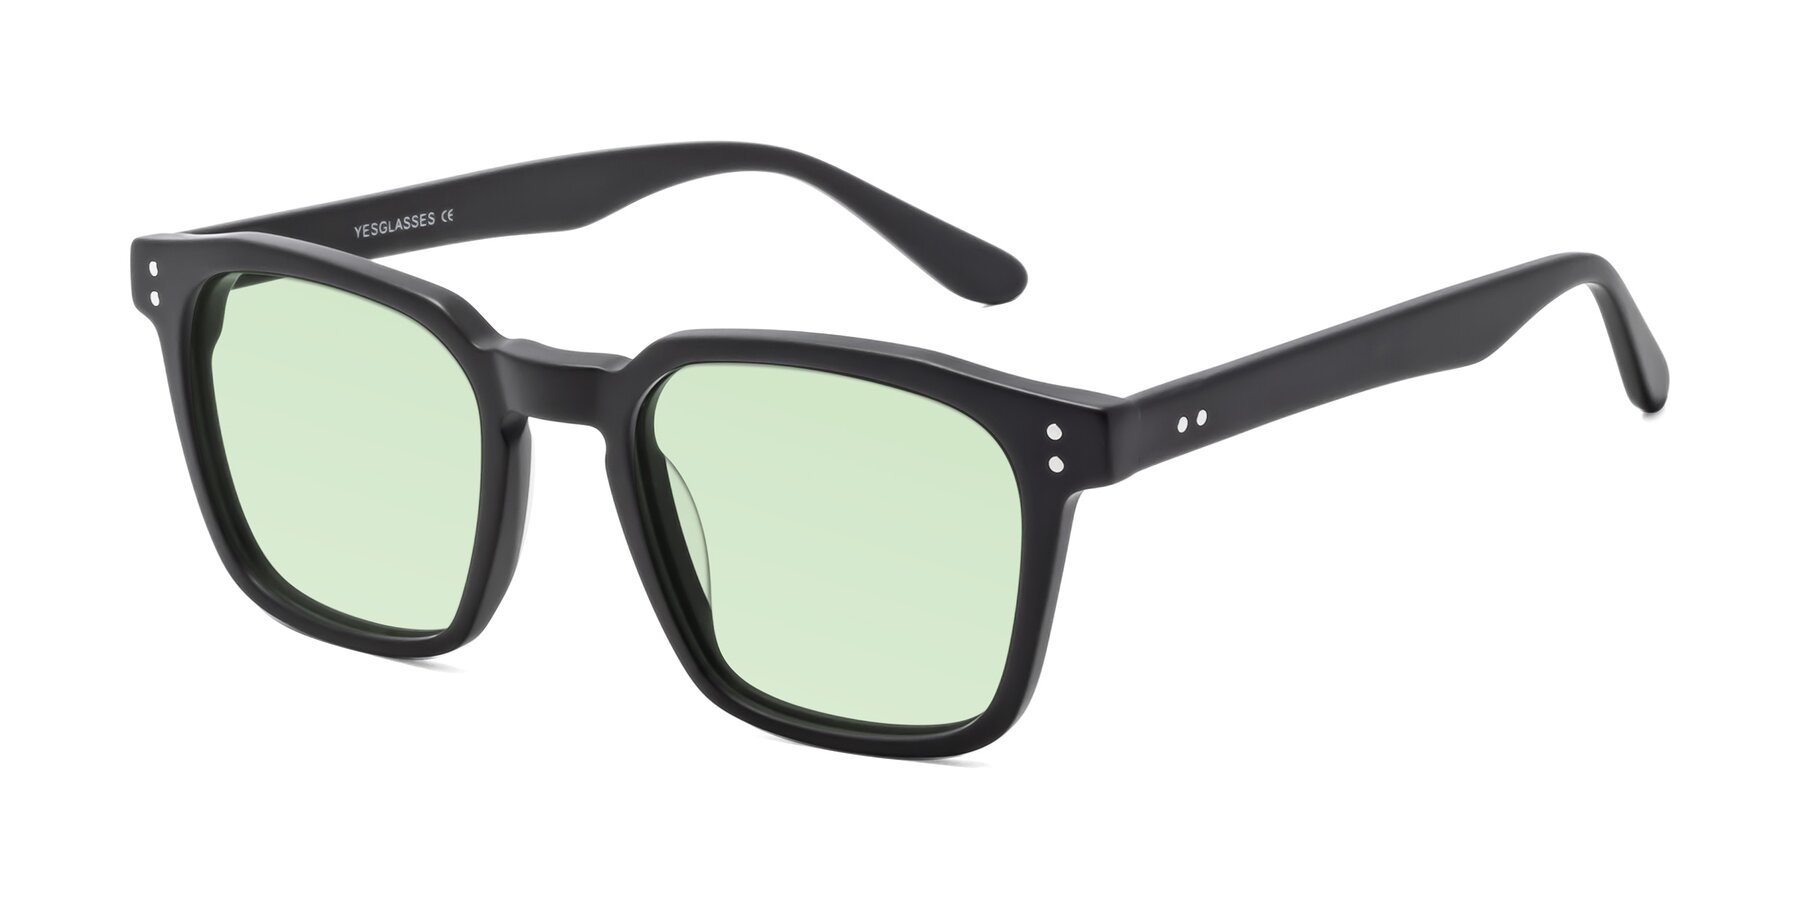 Angle of Riverside in Matte Black with Light Green Tinted Lenses